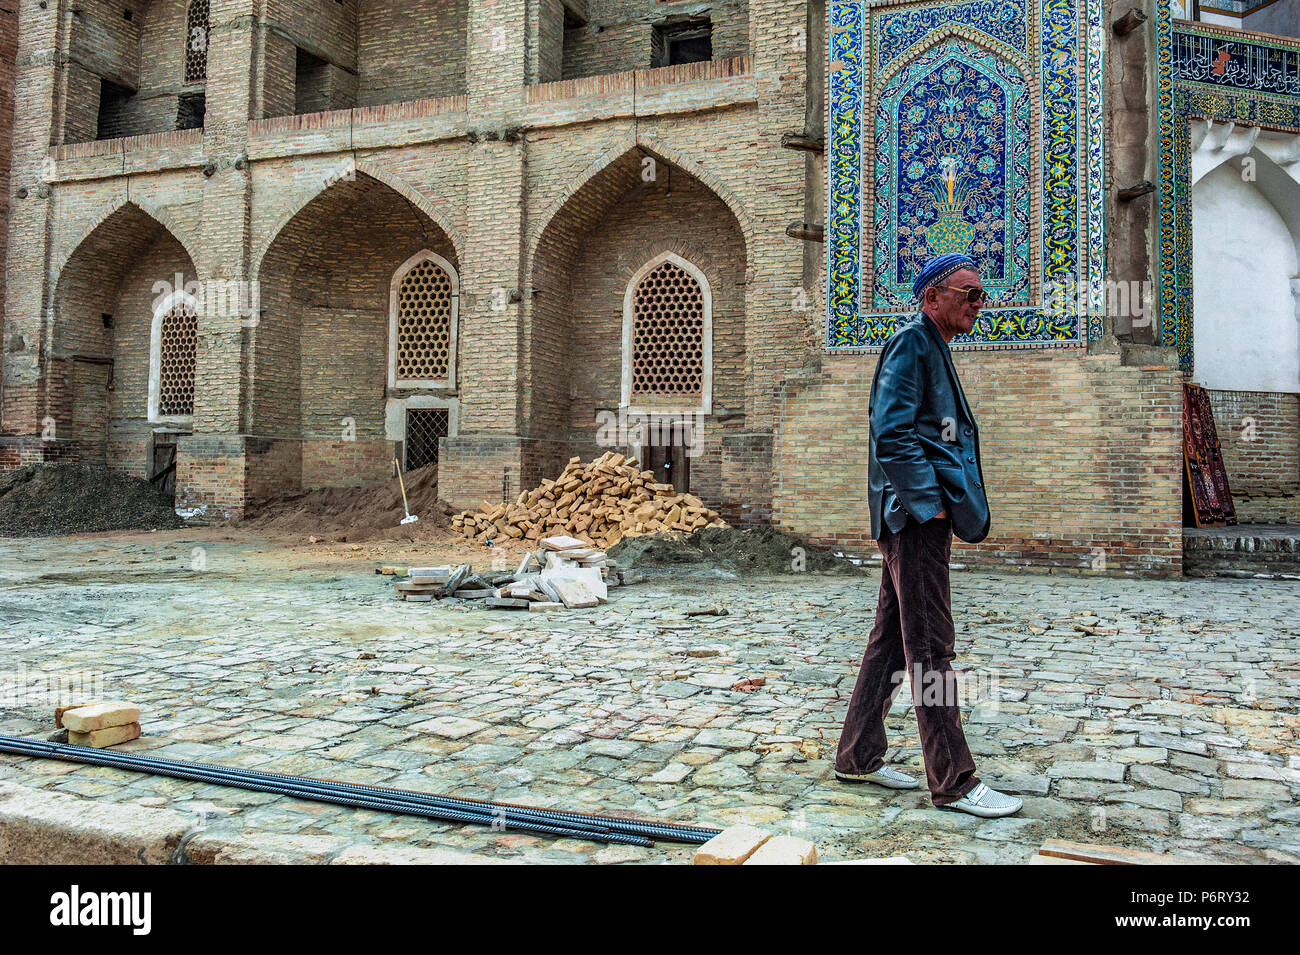 A man walking among the works in progress in front of a building, in Bukhara, Uzbekistan Stock Photo